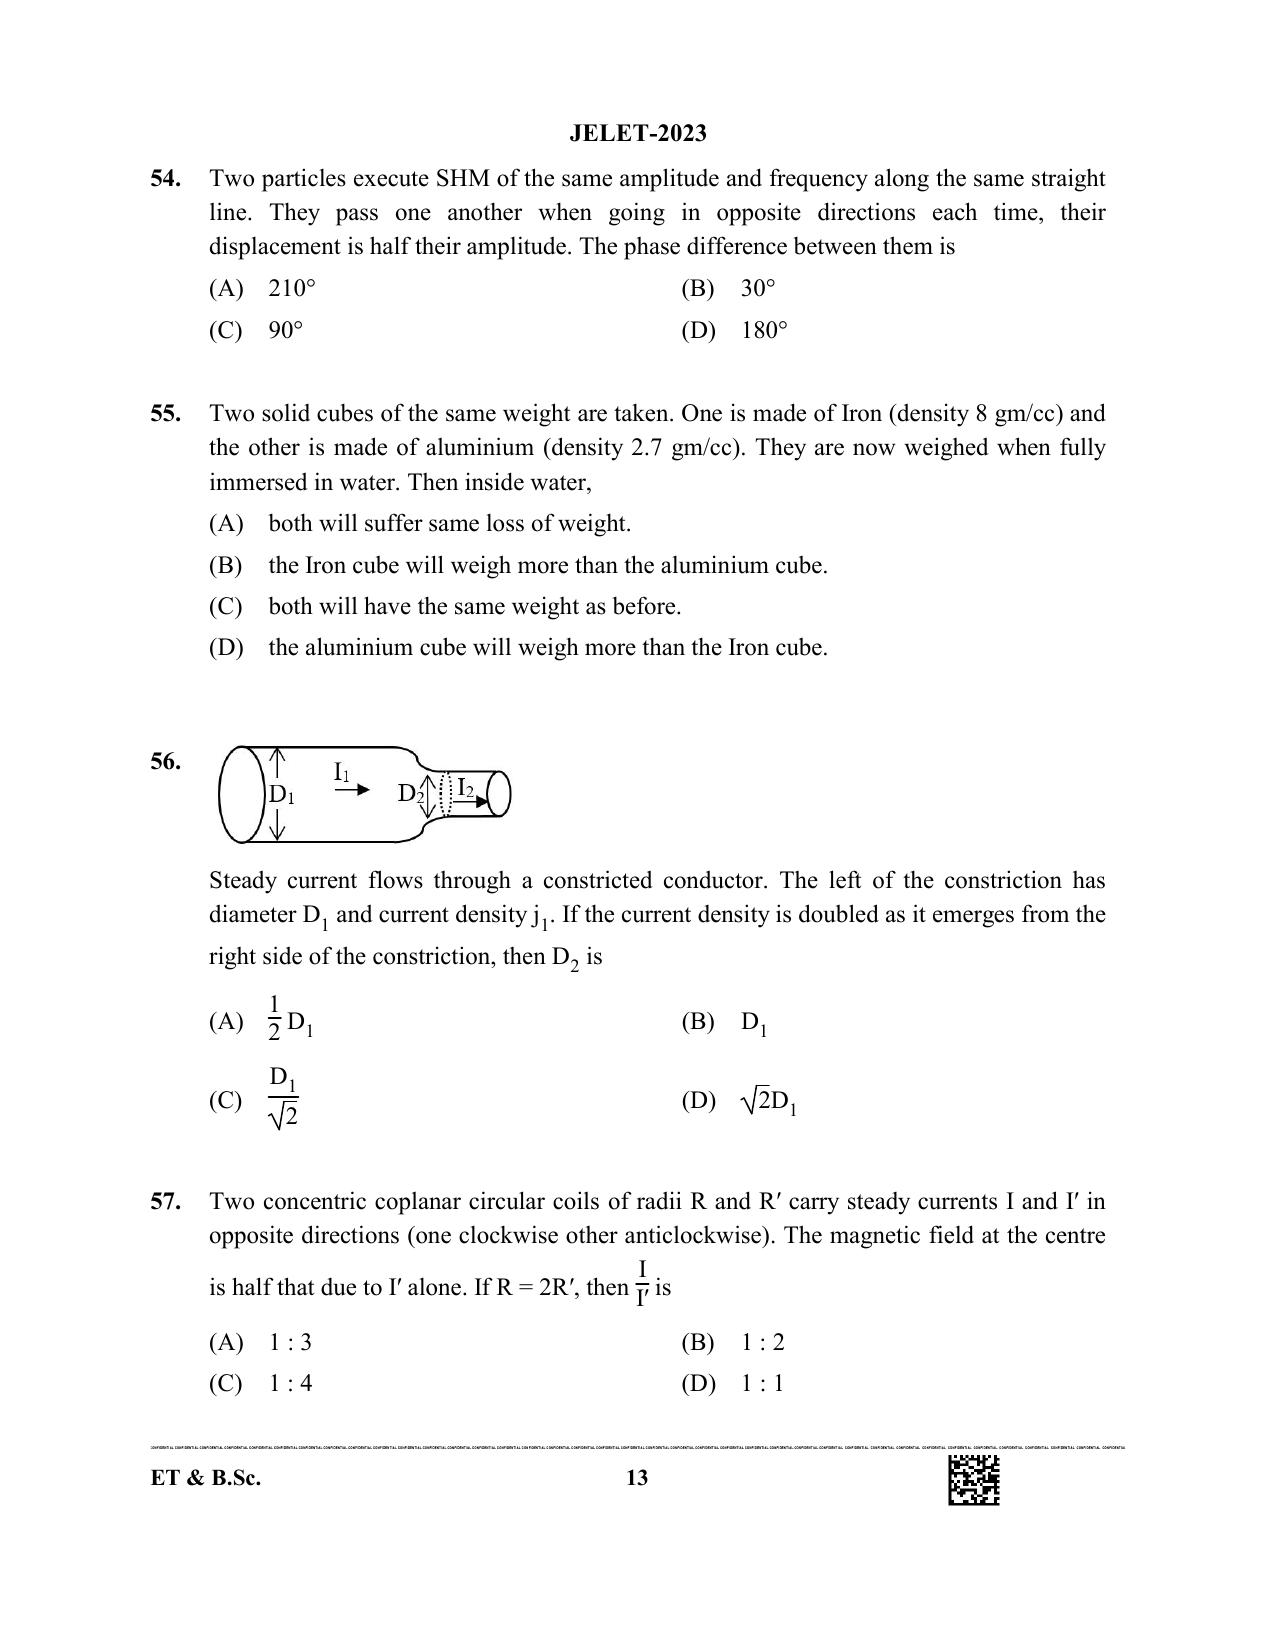 WBJEE JELET 2023 Paper I (ET & BSC) Question Papers - Page 13